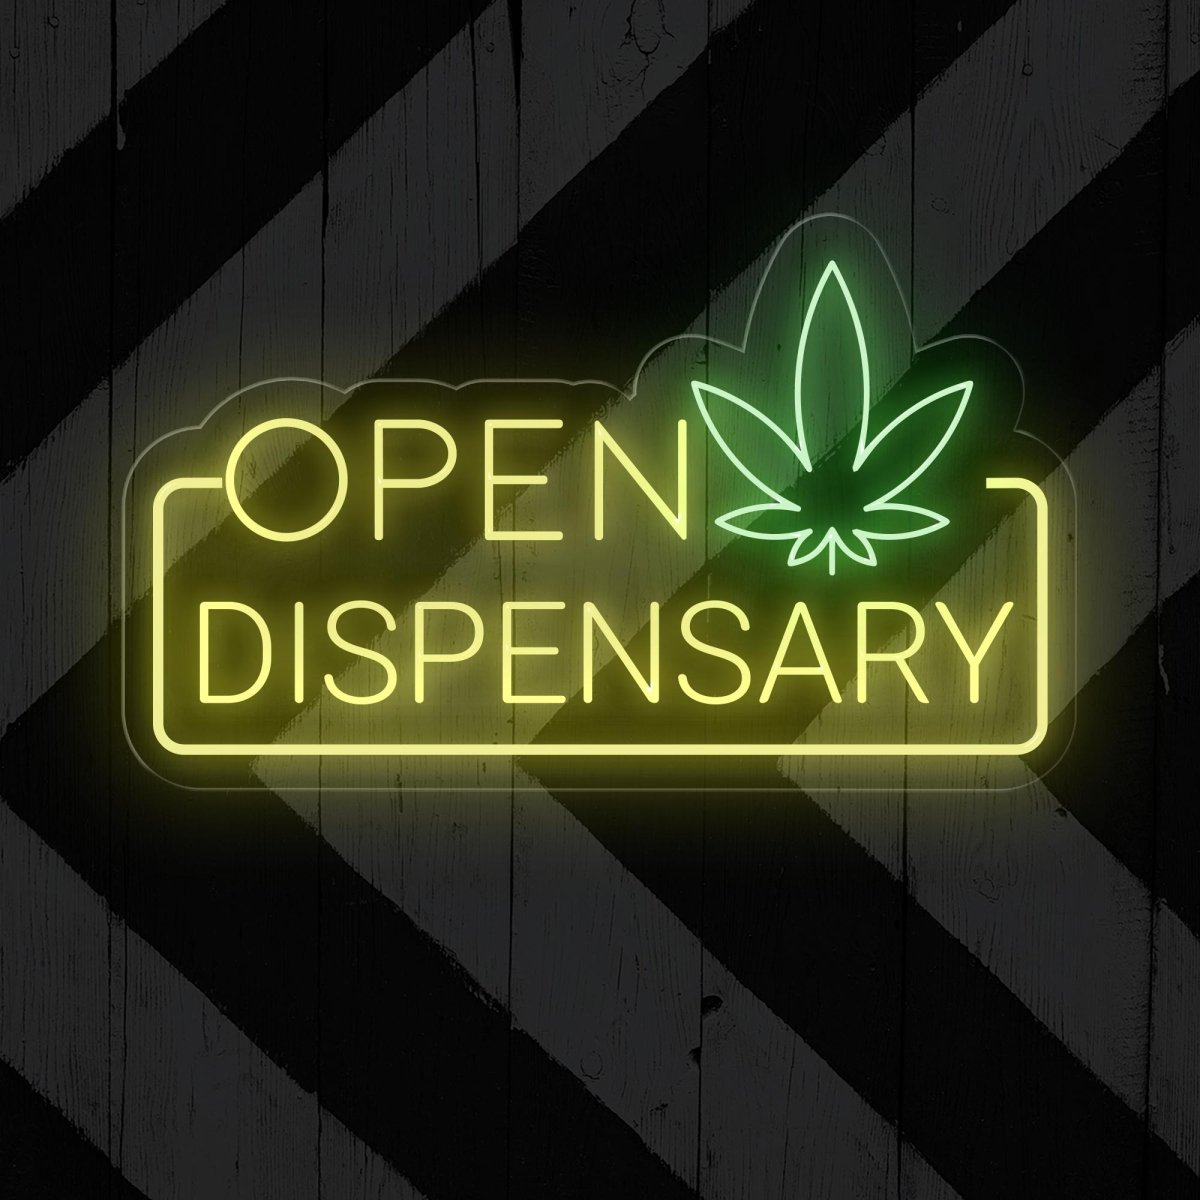 Dispensary Open Neon Sign: Illuminate Your Space with Vibrancy - NEONXPERT